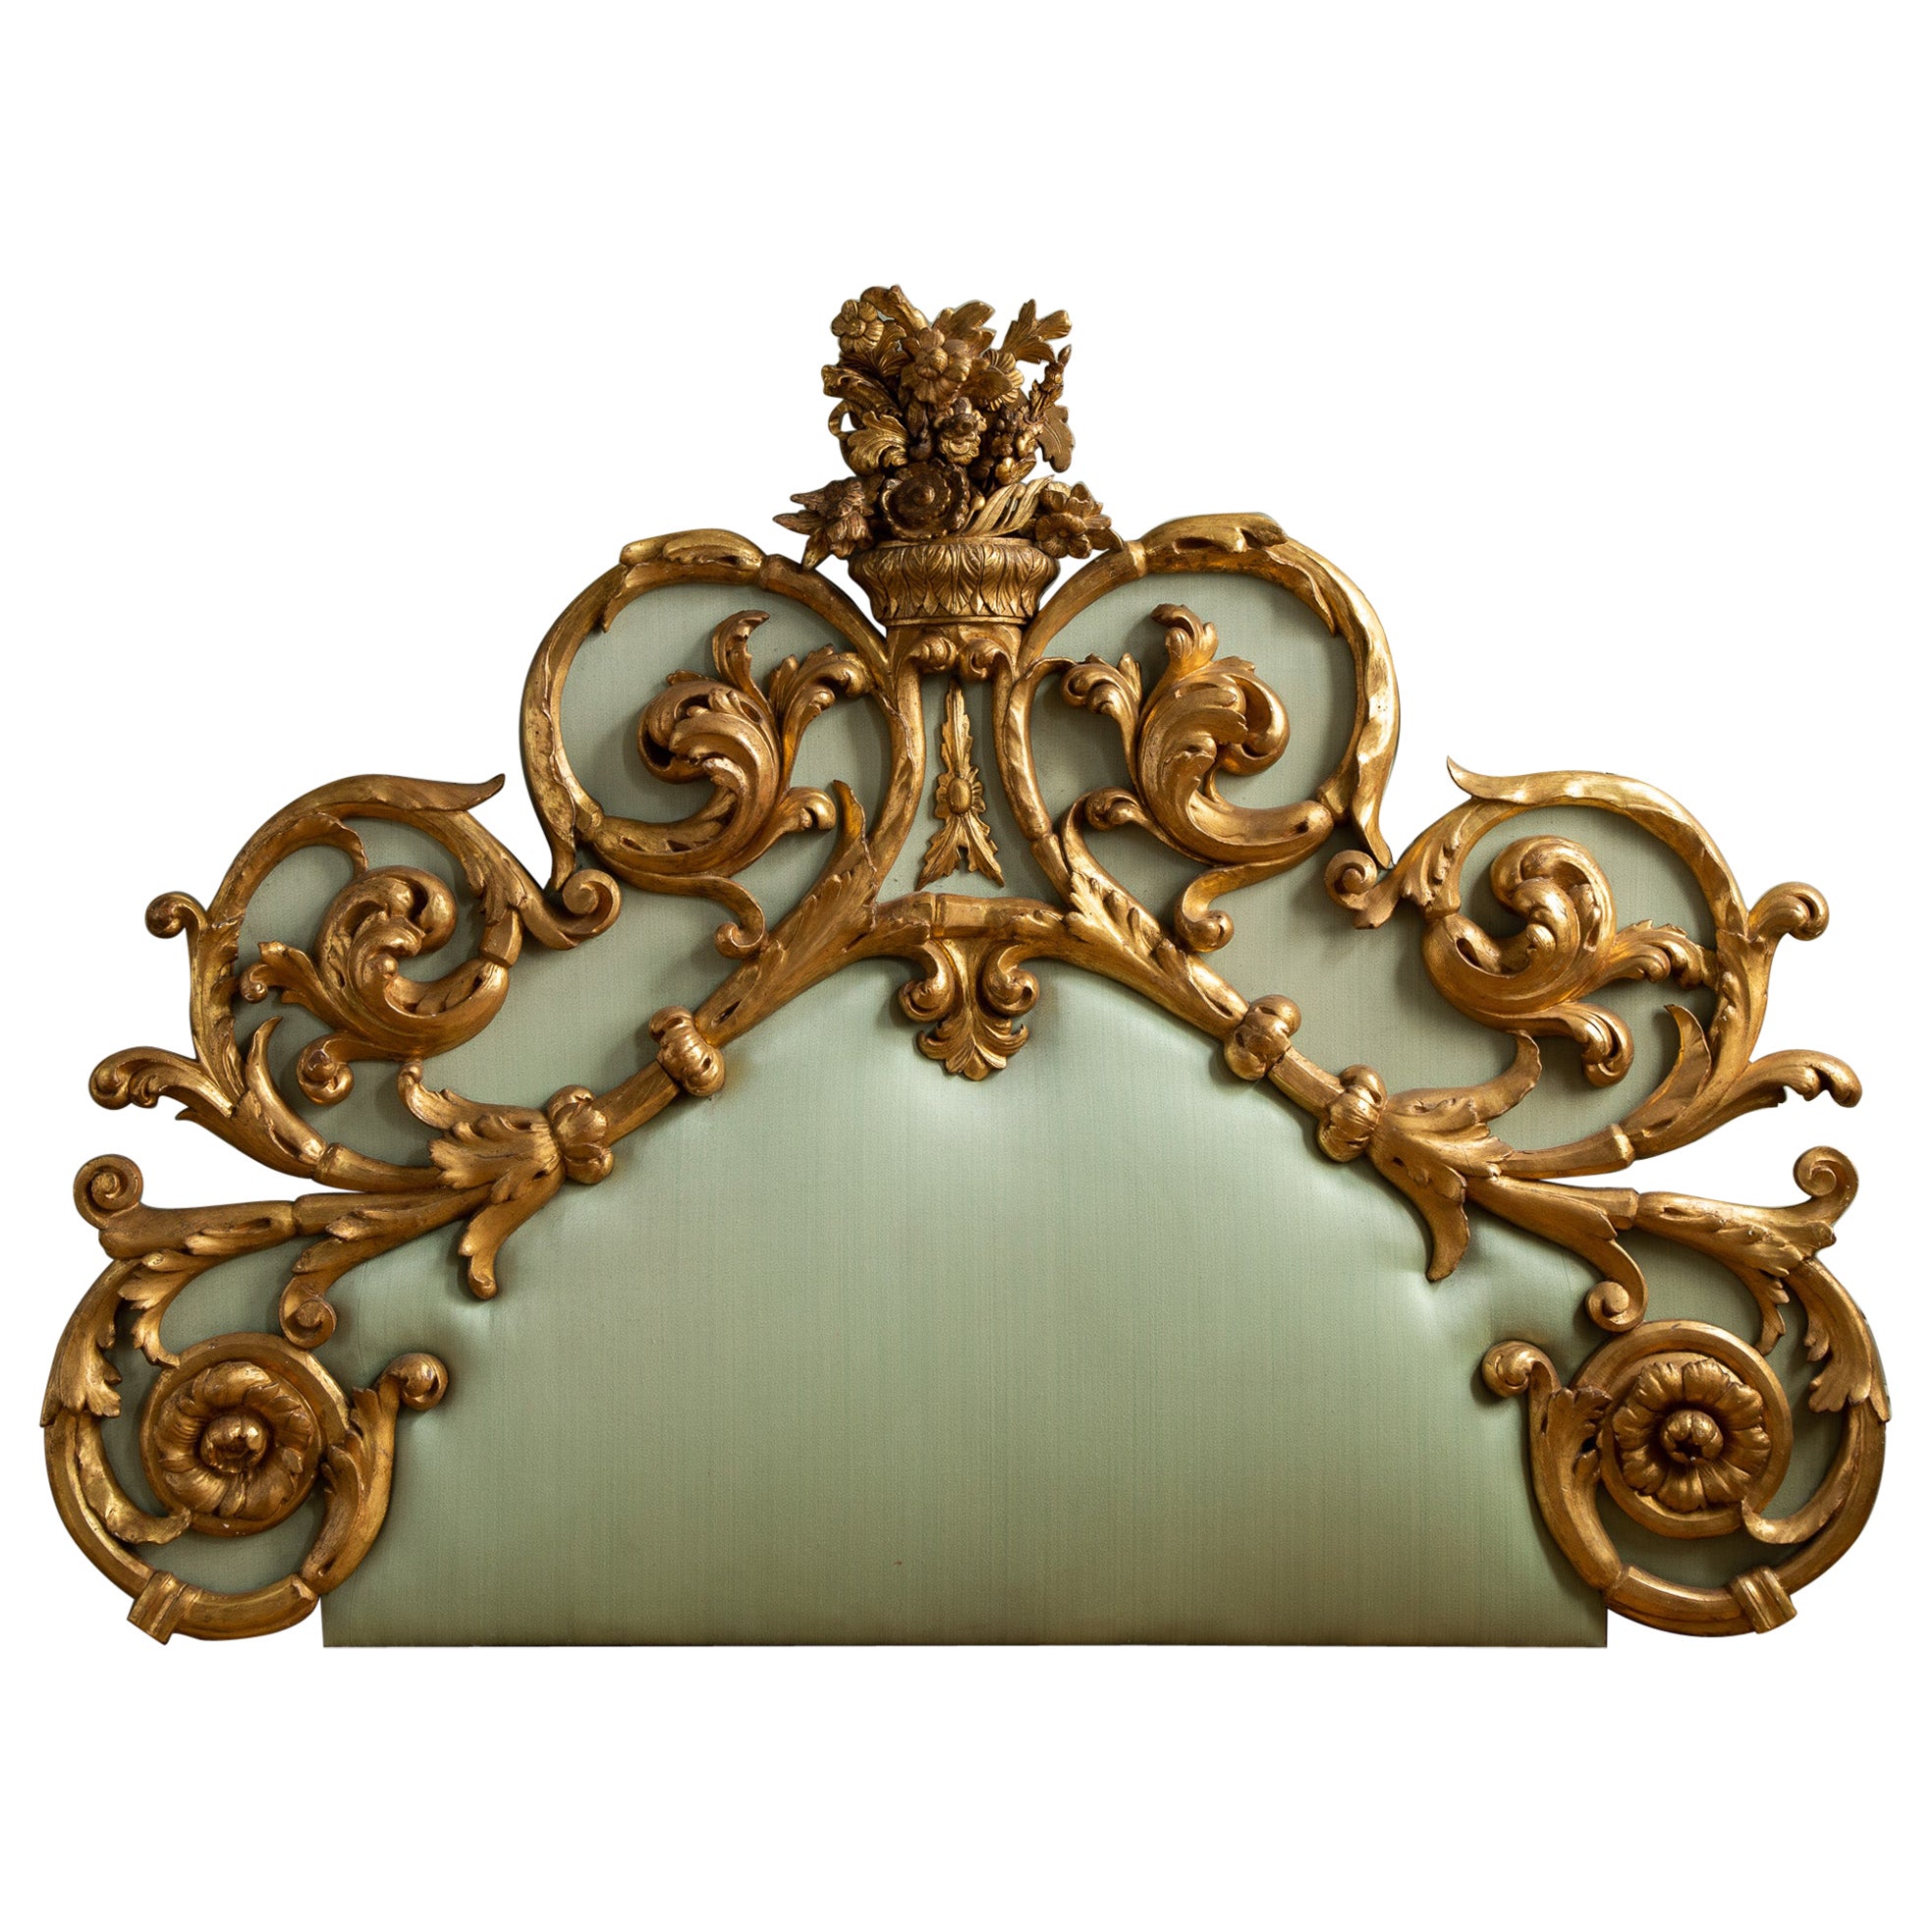 Large 19th Century Gilt wood Hand Carved Venetian Headboard In Rococo Style